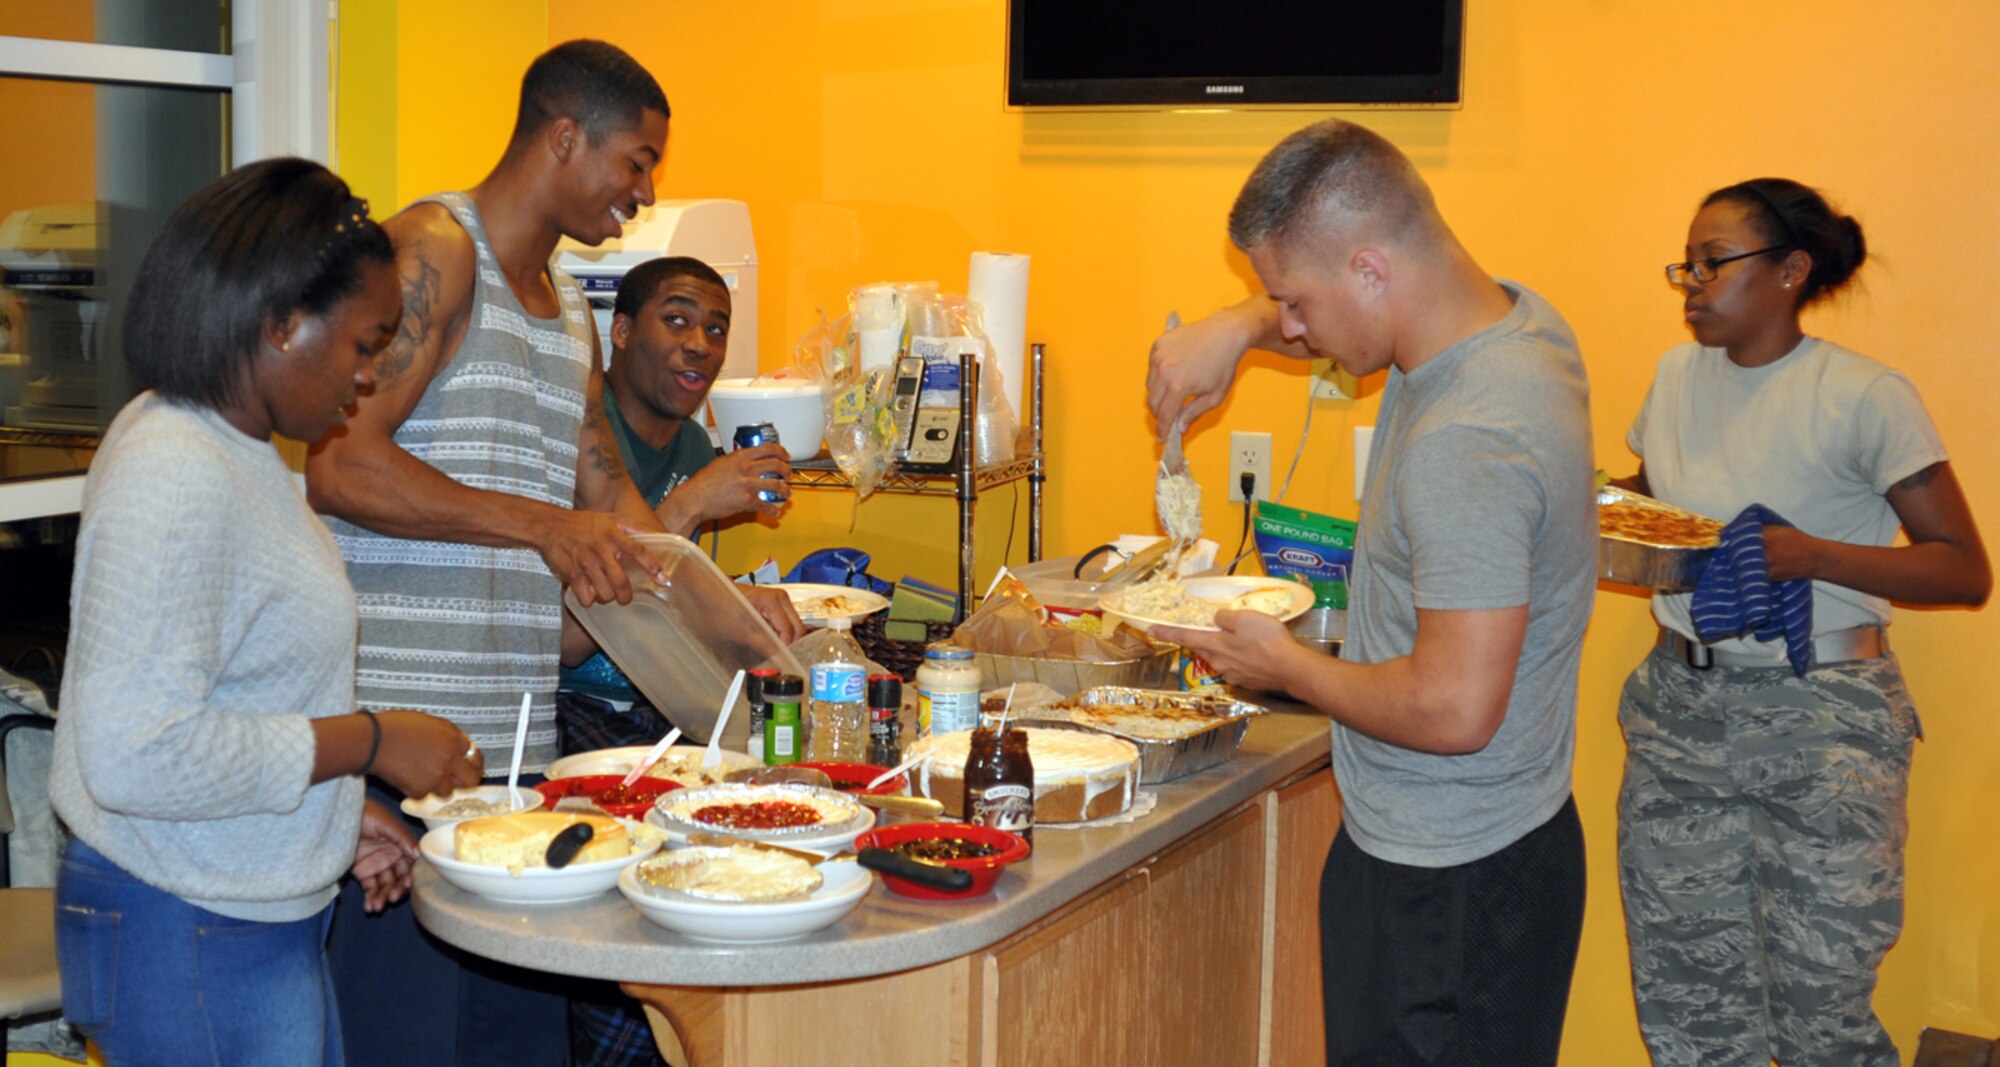 Airmen serve themselves during “Throwdown Thursday” at the Connection on Oct. 10 in Tuskegee Hall, Offutt Air Force Base, Neb. Throwdown Thursday began in September with more than 45 single enlisted military members in attendance. (U.S. Air Force photo by Senior Airman Peter R.O. Danielson/Released)